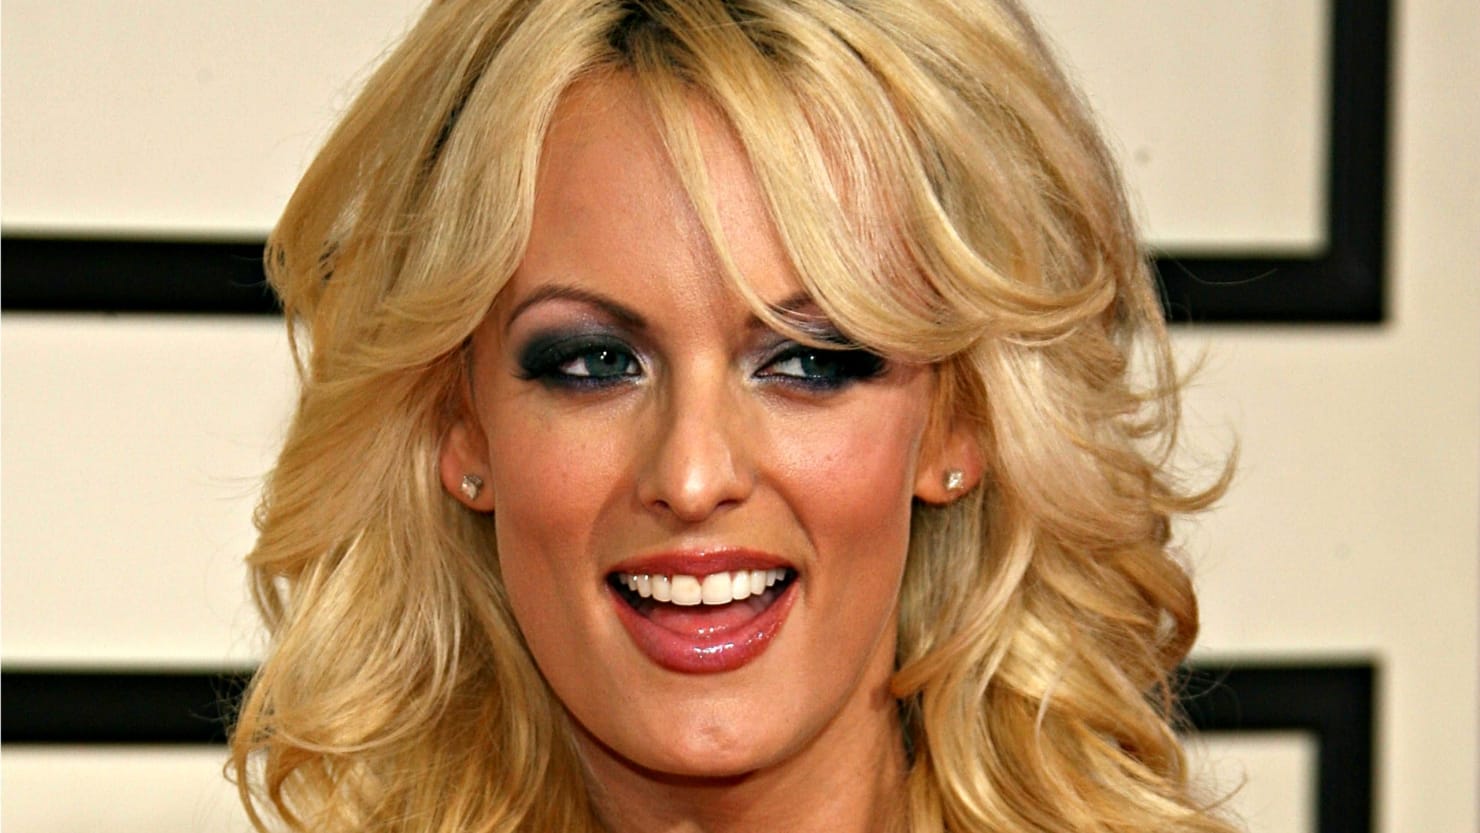 Report: Stormy Daniels Once Claimed She Spanked Trump With a Magazine